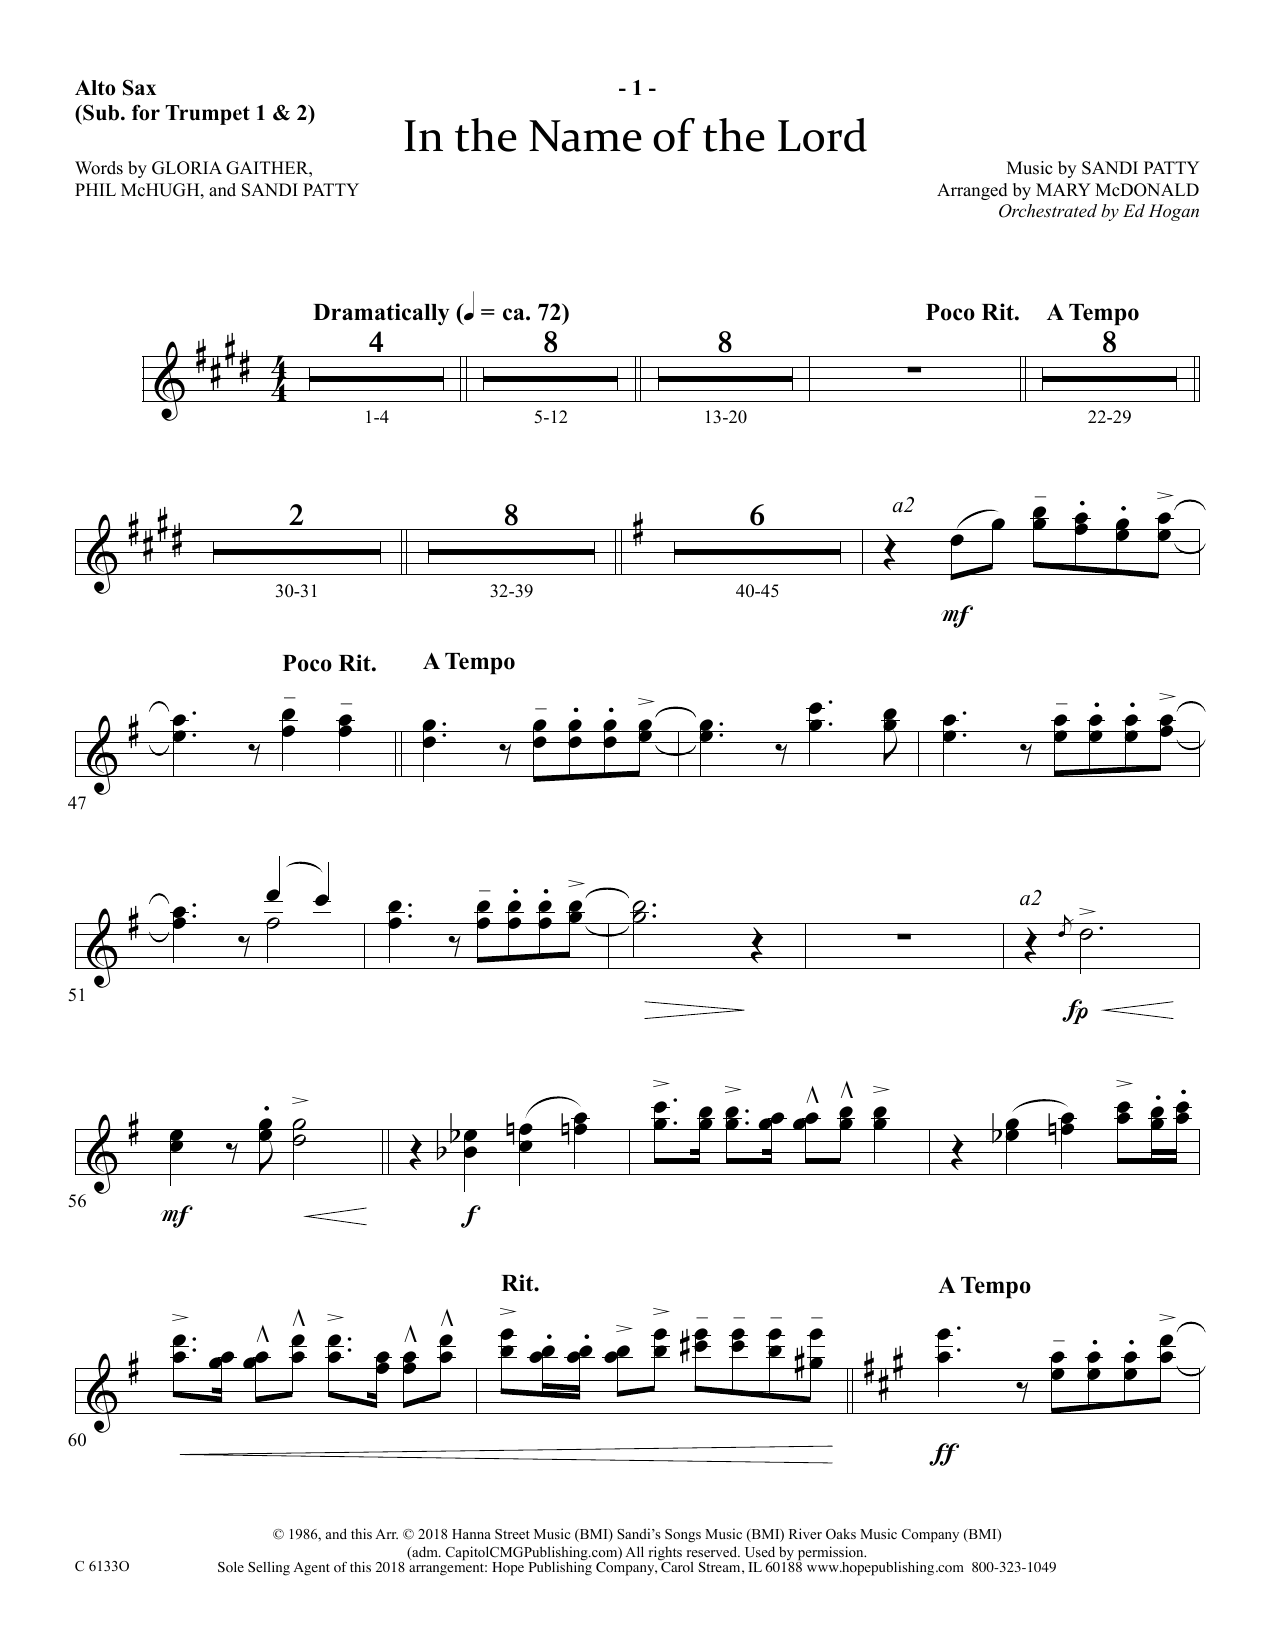 Download Ed Hogan In The Name Of The Lord - Alto Sax (sub Sheet Music